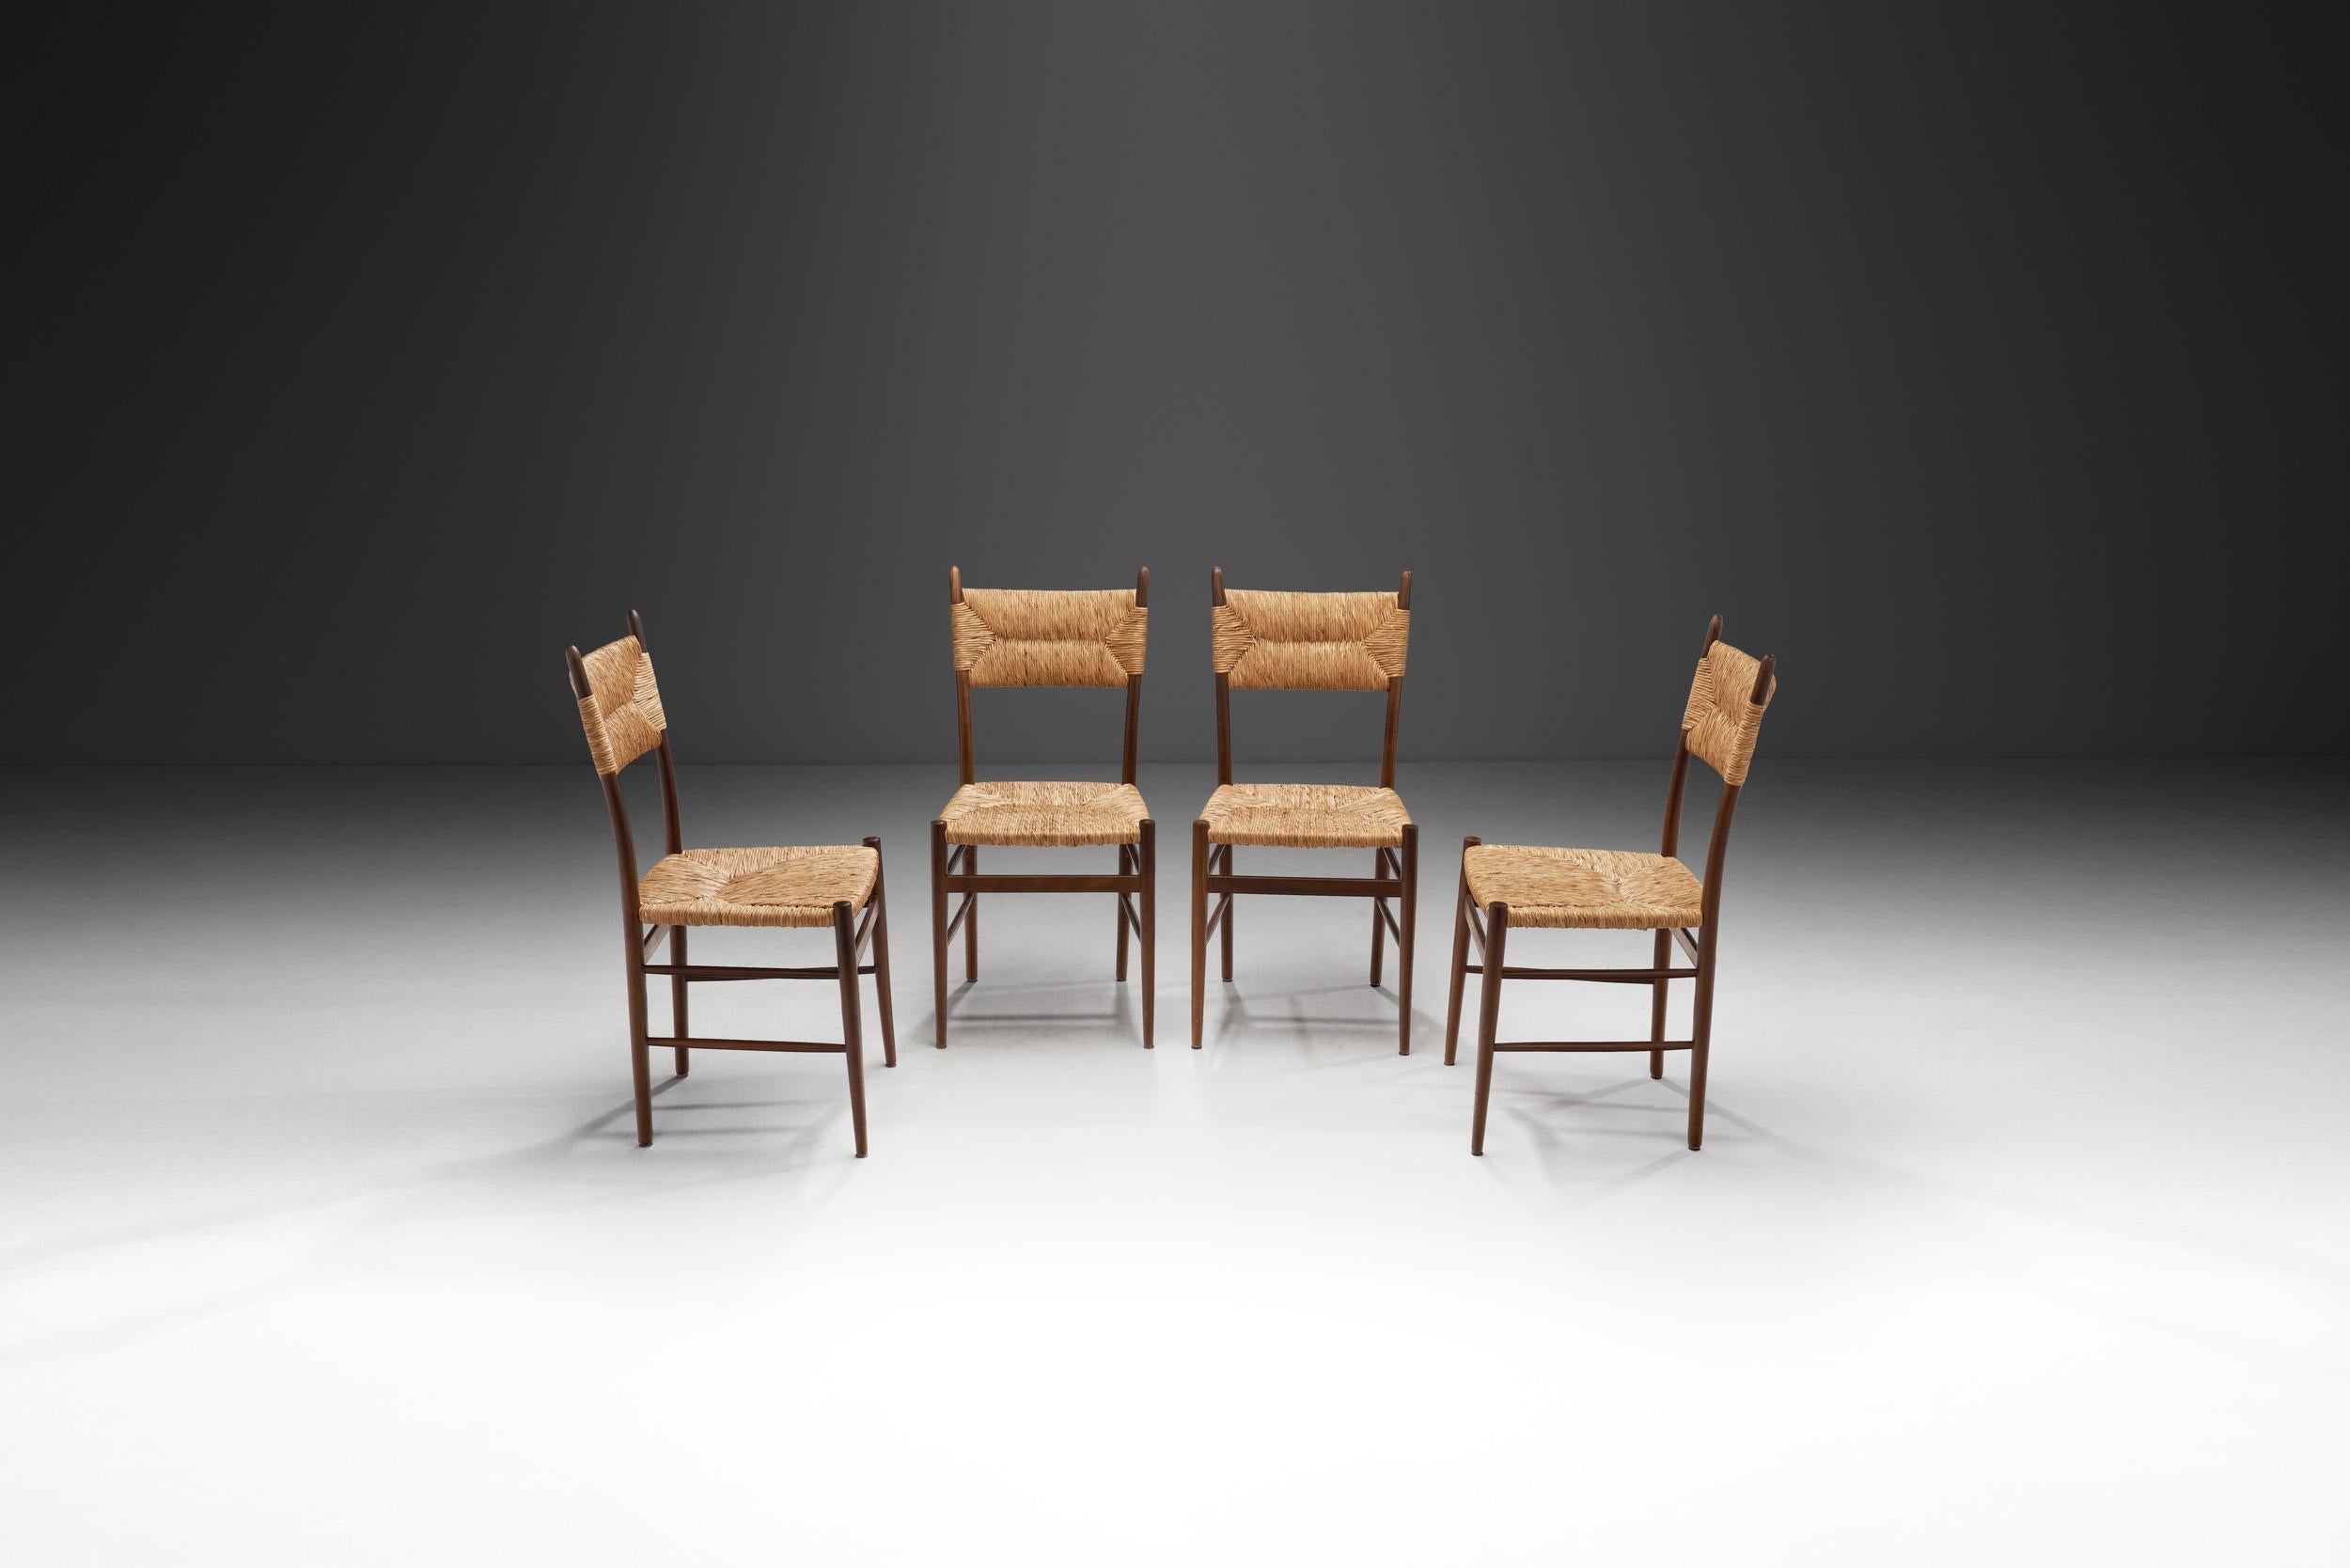 This set of four chairs, reminiscent of Charlotte Perriand's iconic Bauche No. 19 Chairs for BCB, stand as a testament to the exquisite blend of modernism and nature. Crafted with a keen eye for harmony, these chairs encapsulate the spirit of